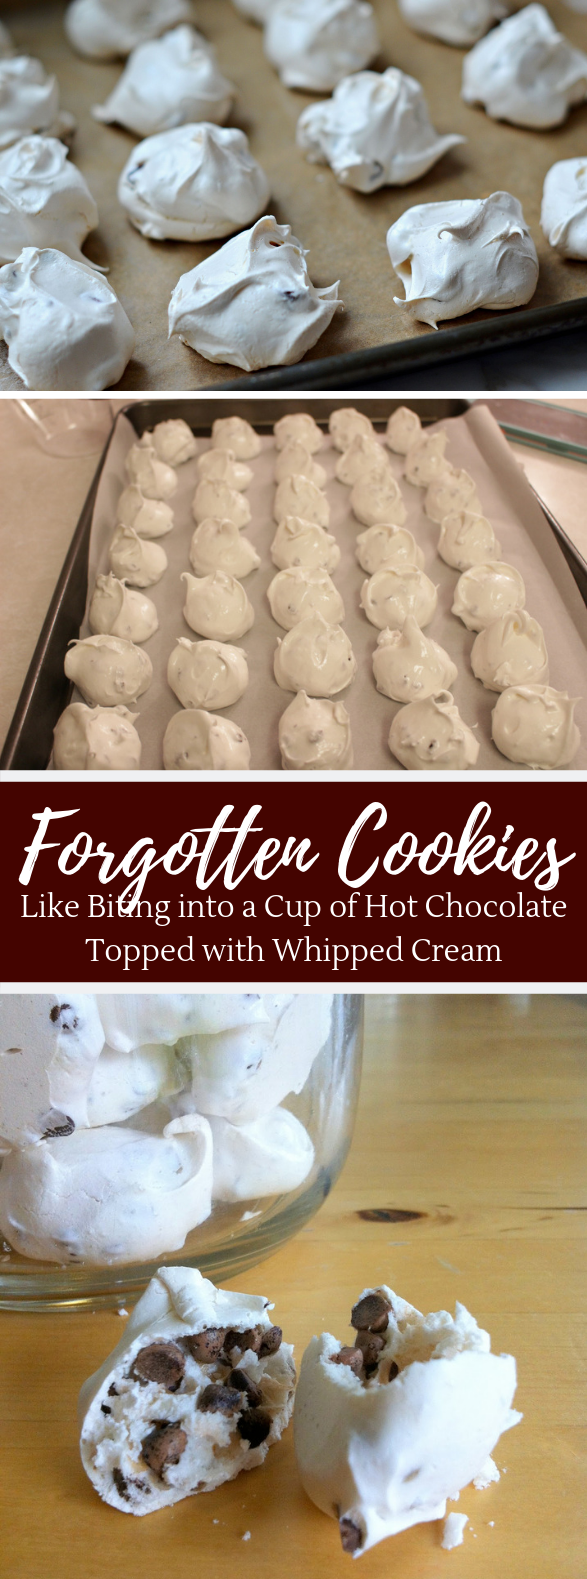 Forgotten Cookies: Like Biting into a Cup of Hot Chocolate Topped with Whipped Cream #desserts #christmas